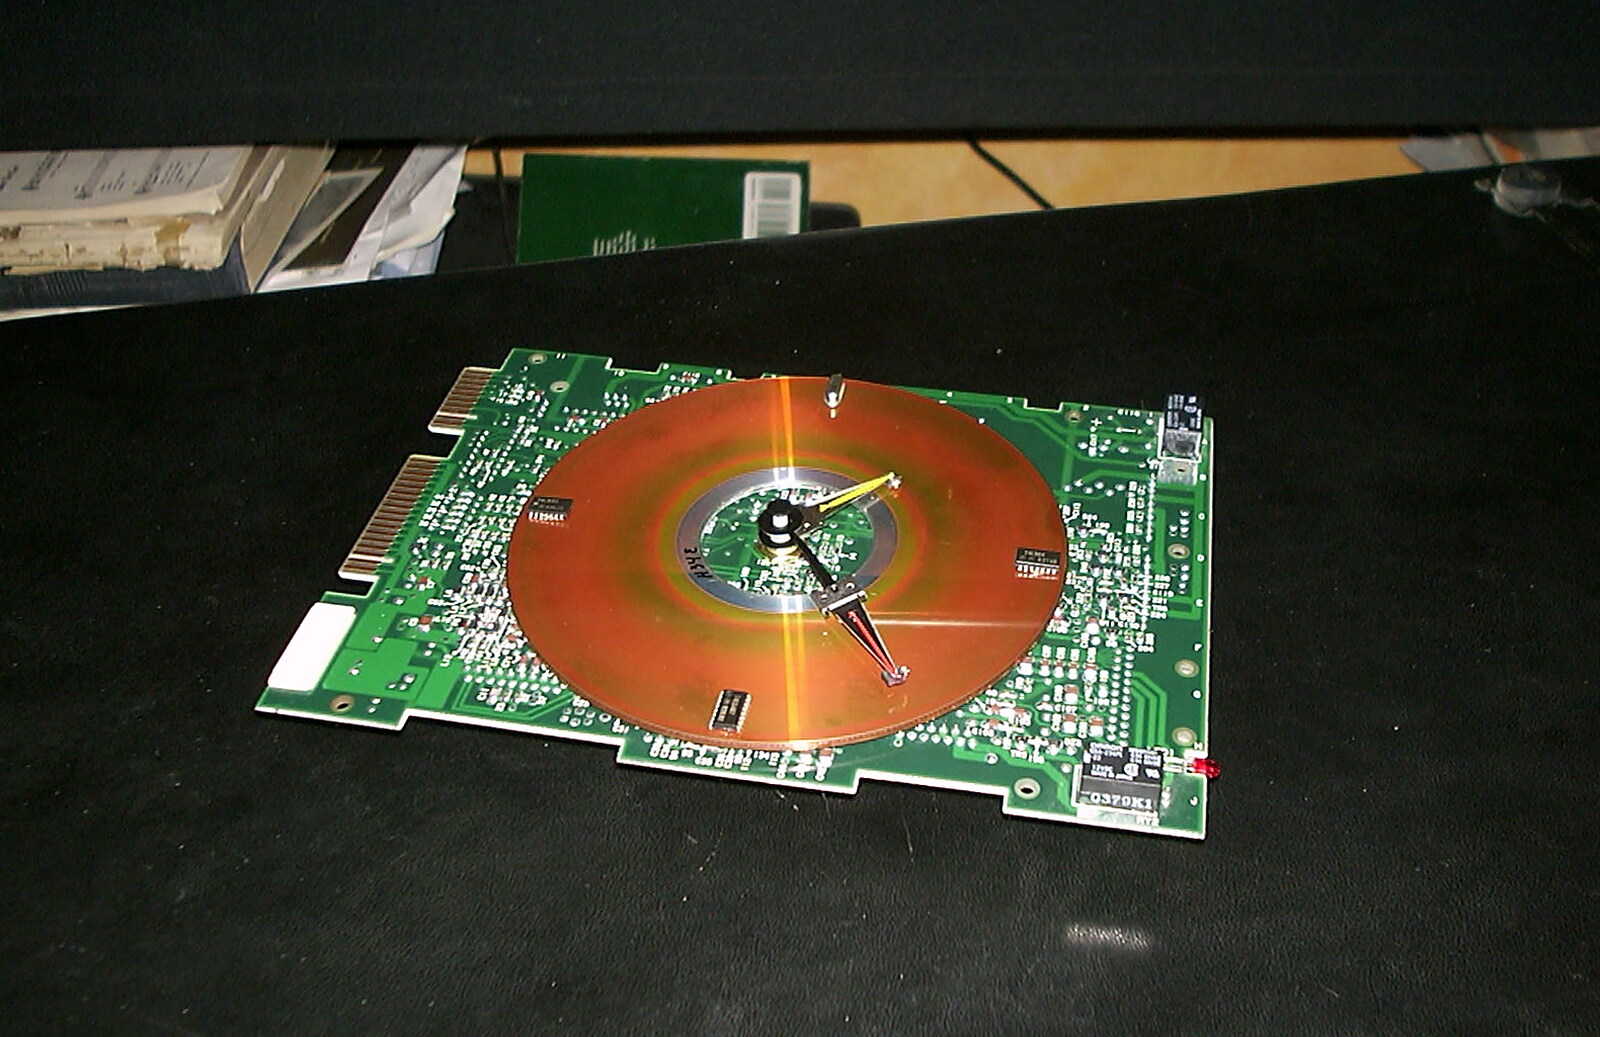 The hard drive clock has hands on it from A Hard-Drive Clock and Other Projects, Brome, Suffolk - 28th June 2002